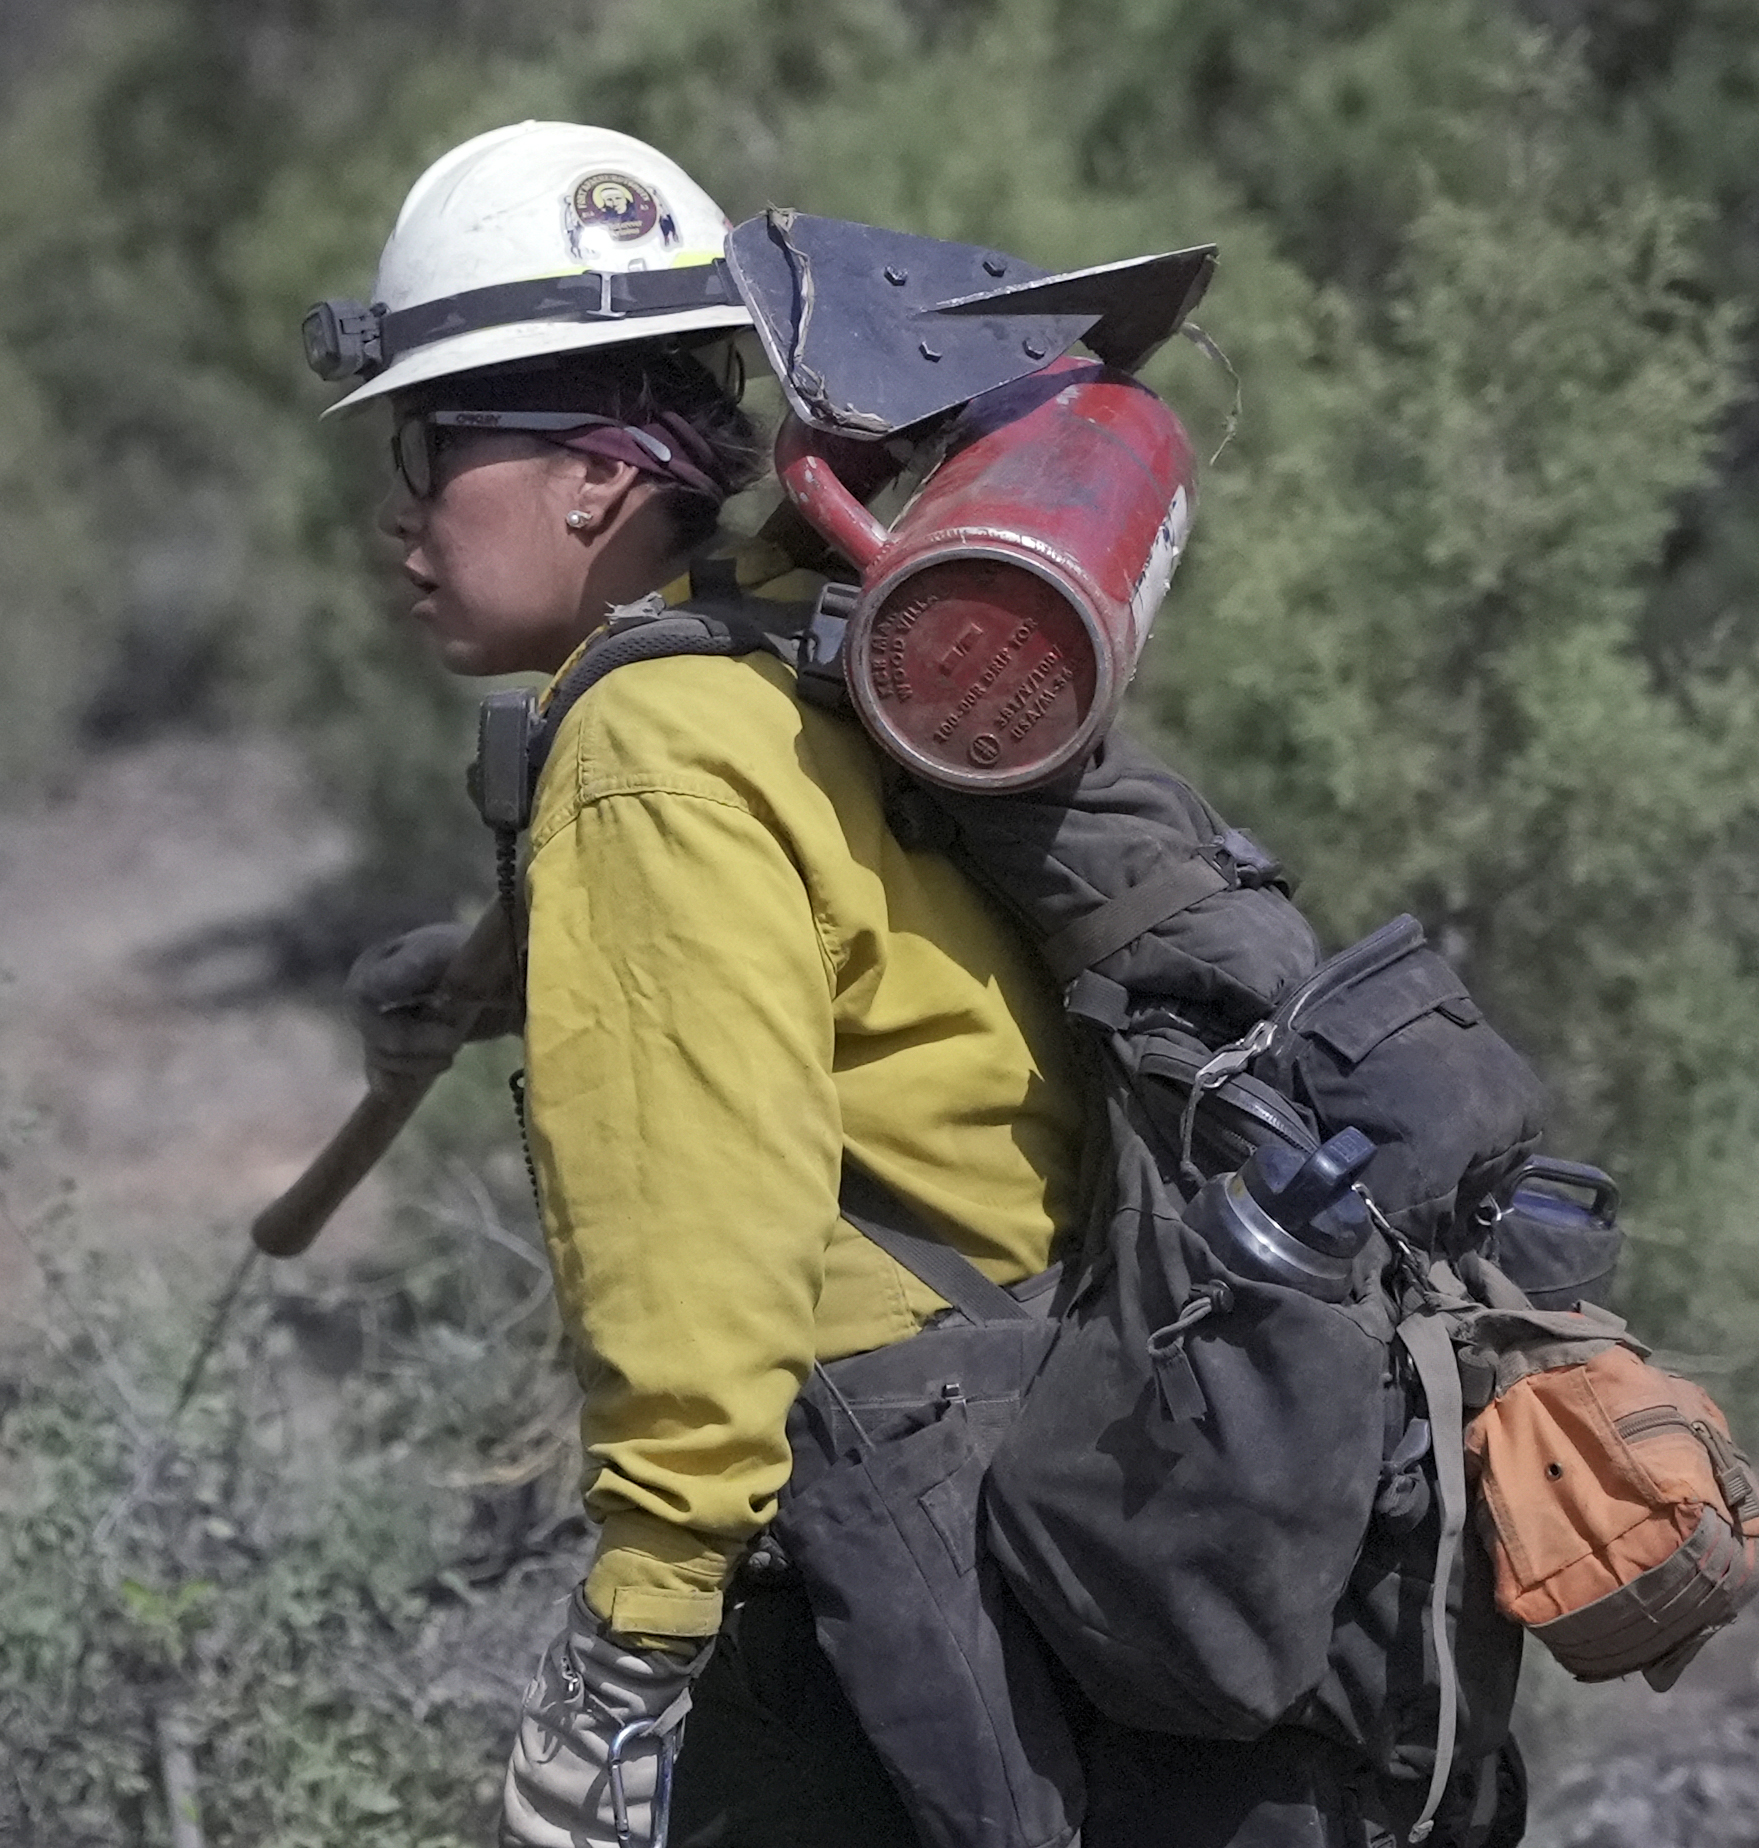 Fort Apache crewmember carrying drip torch. Photo by BIA